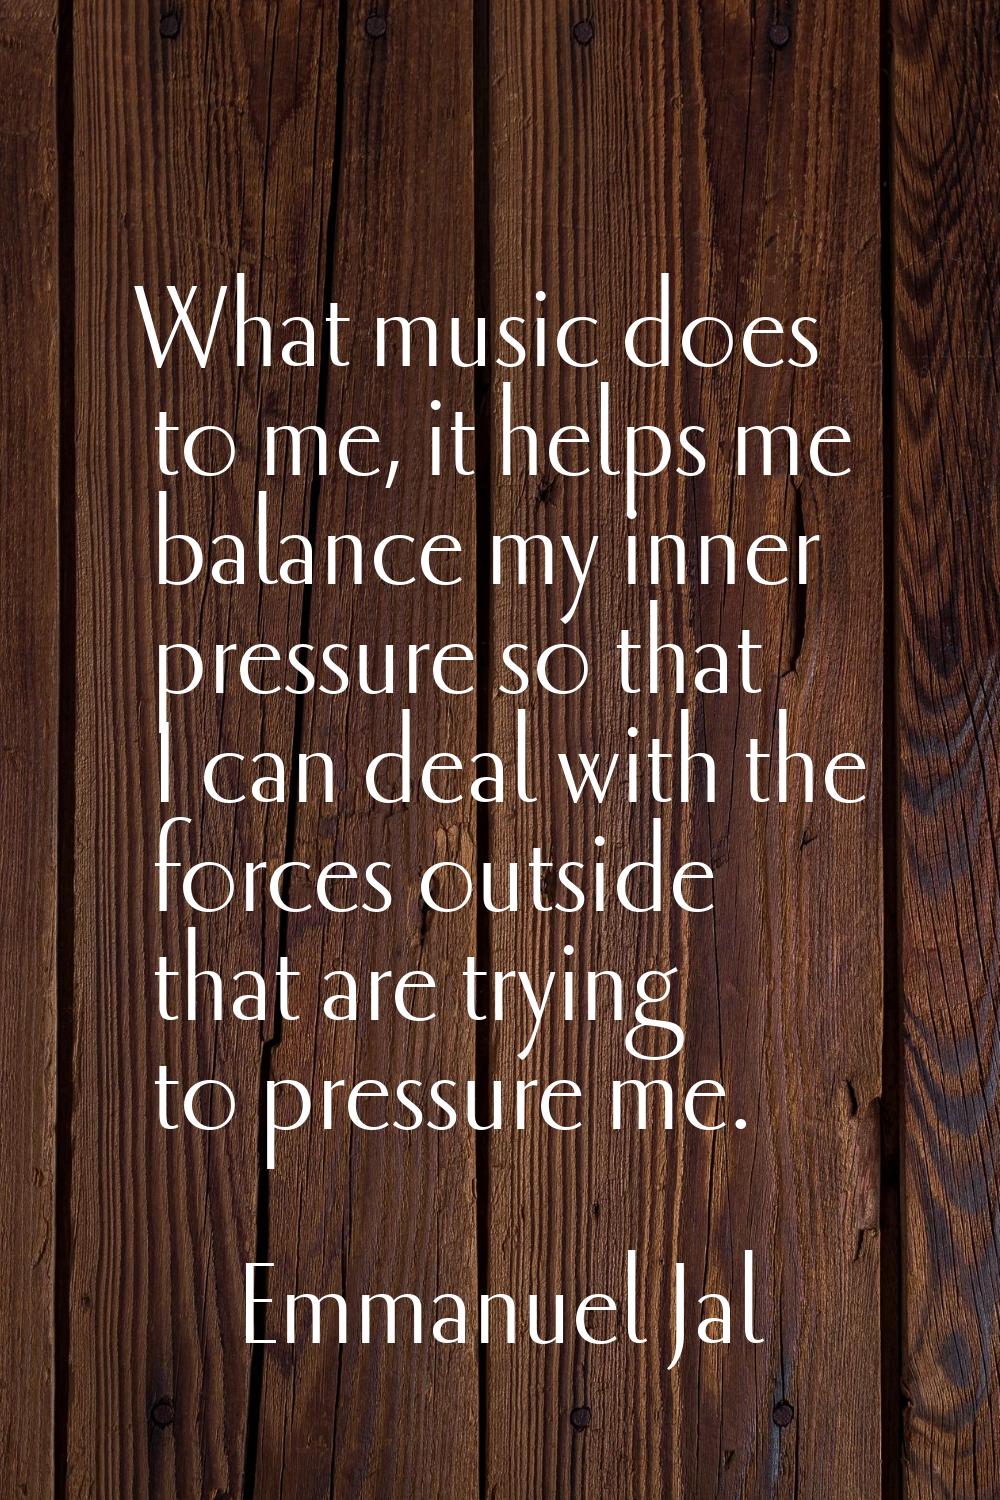 What music does to me, it helps me balance my inner pressure so that I can deal with the forces out